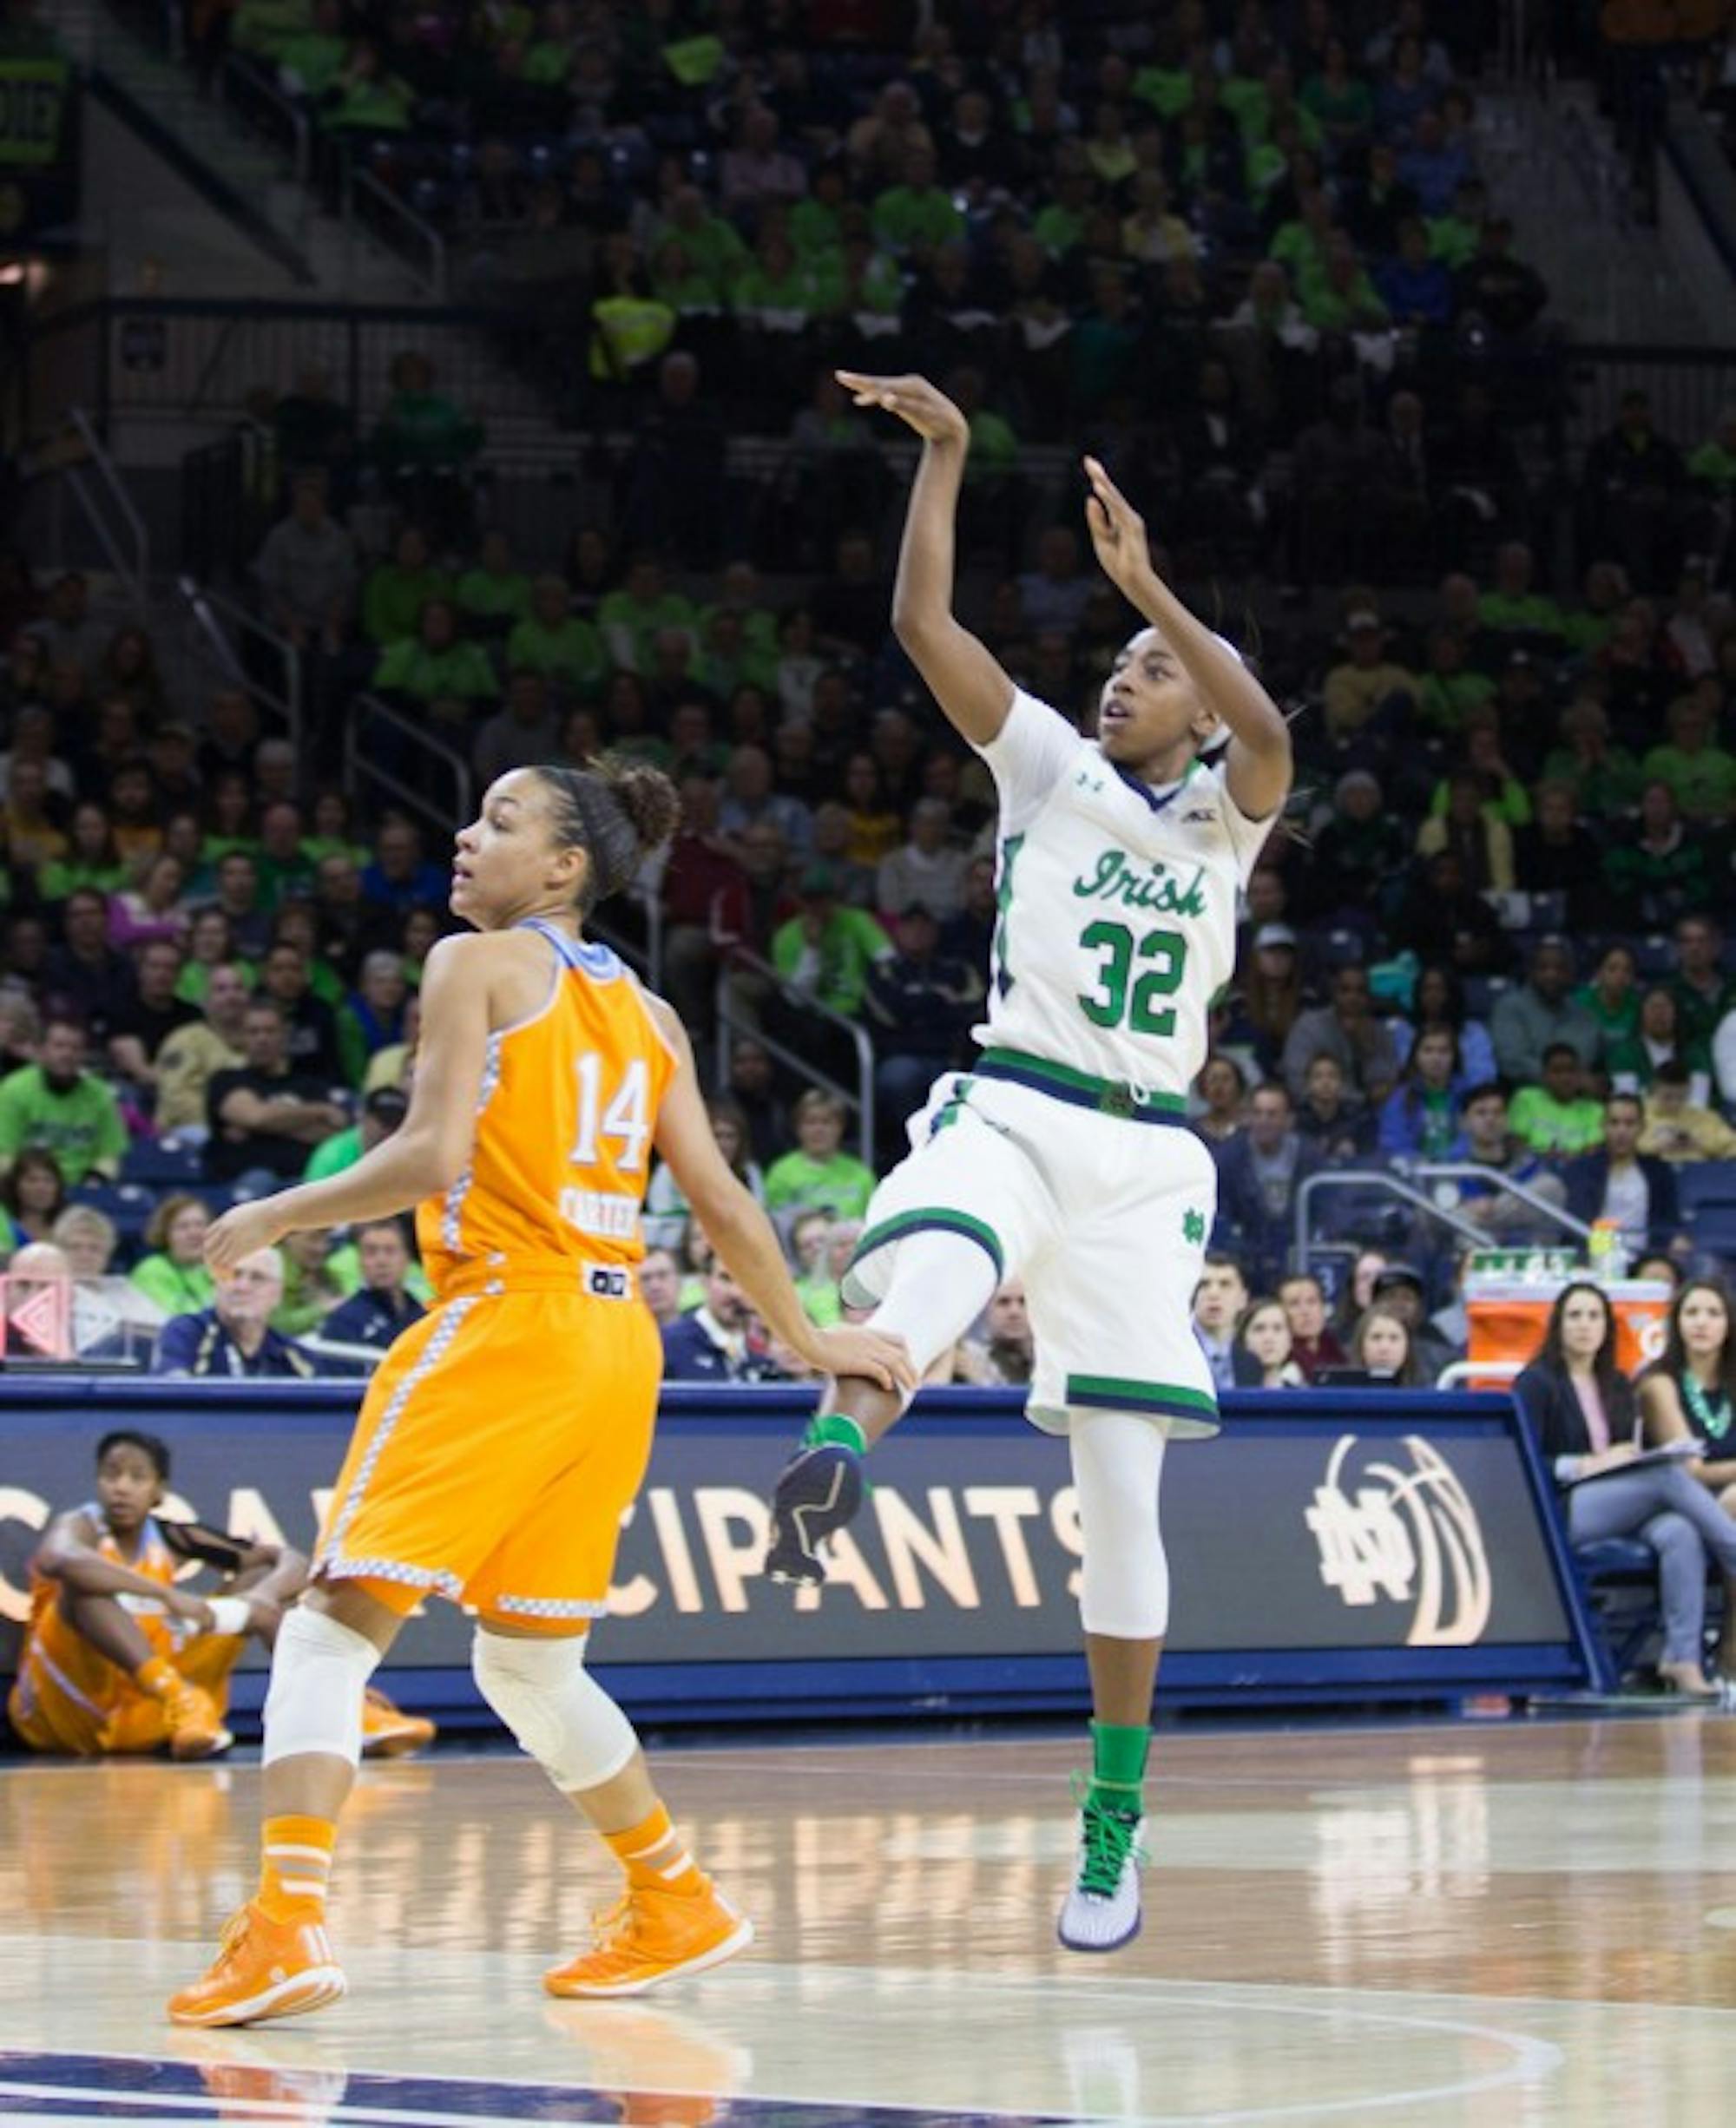 Irish junior guard Jewell Loyd puts up a three in Notre Dame’s 88-77 win over Tennessee on Monday at Purcell Pavilion. Loyd netted 34 points in leading Notre Dame to its fifth straight win over the Lady Vols.